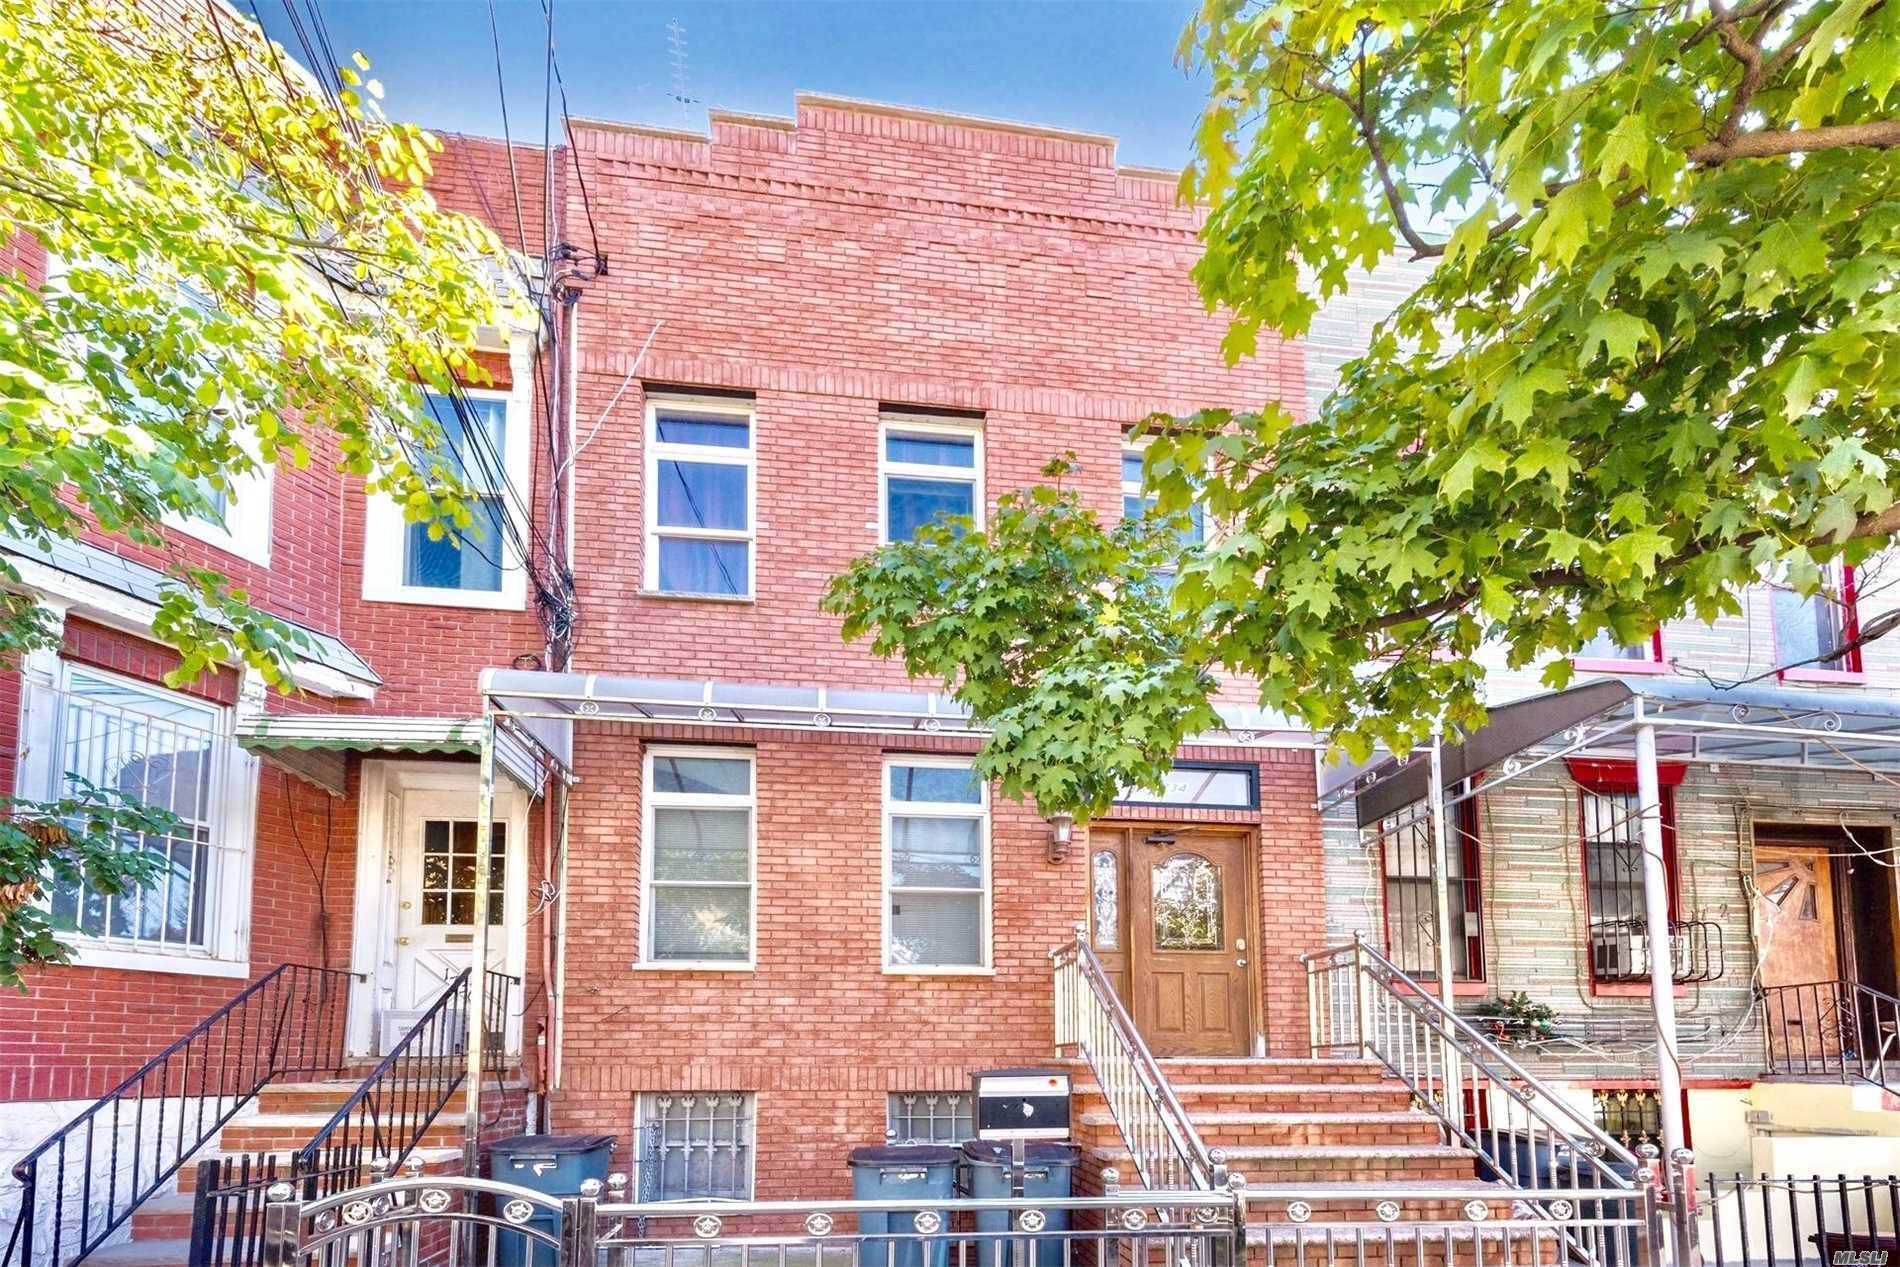 Two Family House In The Exclusive Area Of Ridgewood Near All Transportation,Close To Subway L Train Supermarkets.